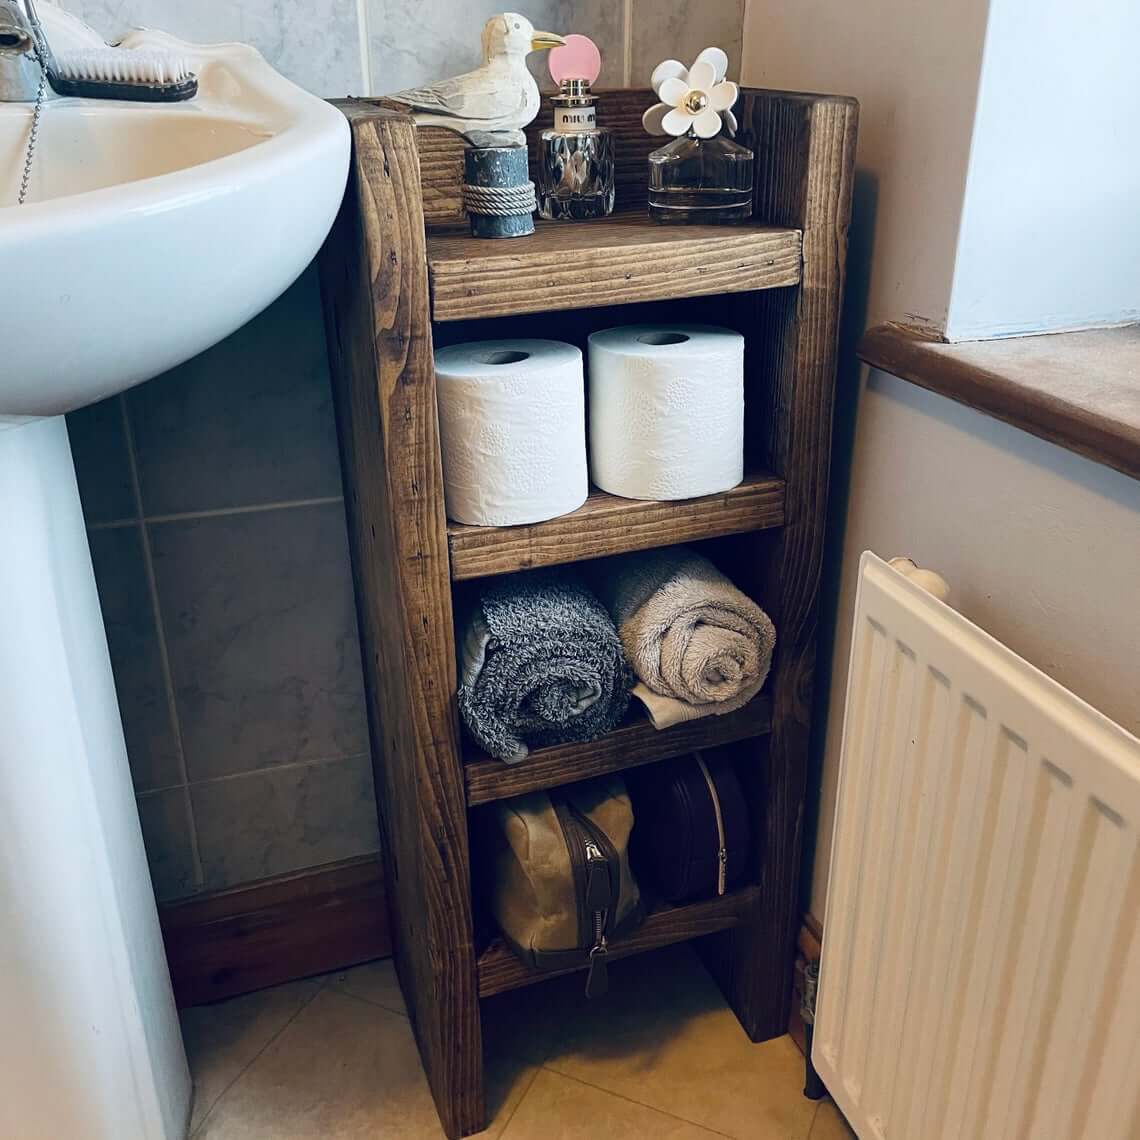 45 Best Towel Storage Ideas And, Bathroom Shelves Ideas For Towels